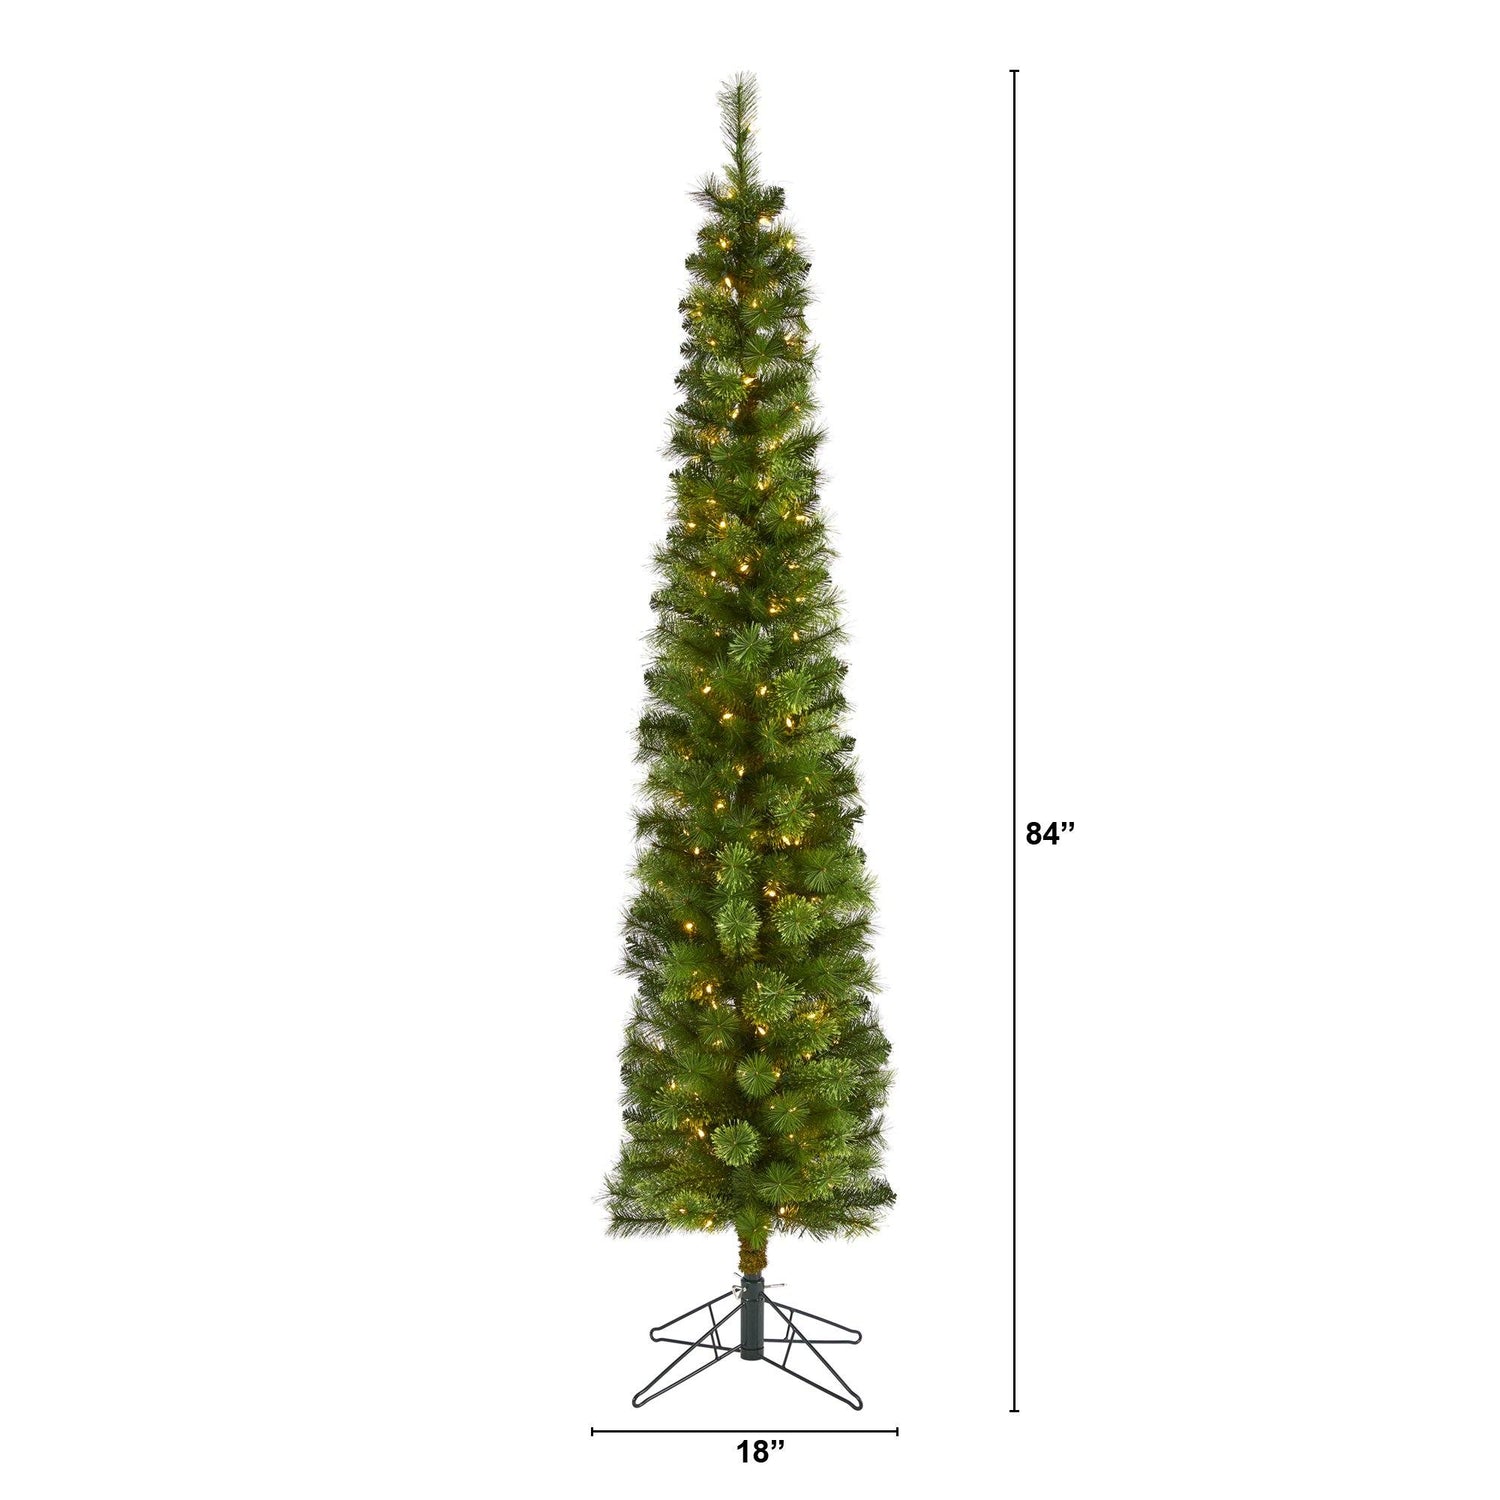 7' Green Pencil Artificial Christmas Tree with 150 Clear (Multifunction) LED Lights and 338 Bendable Branches